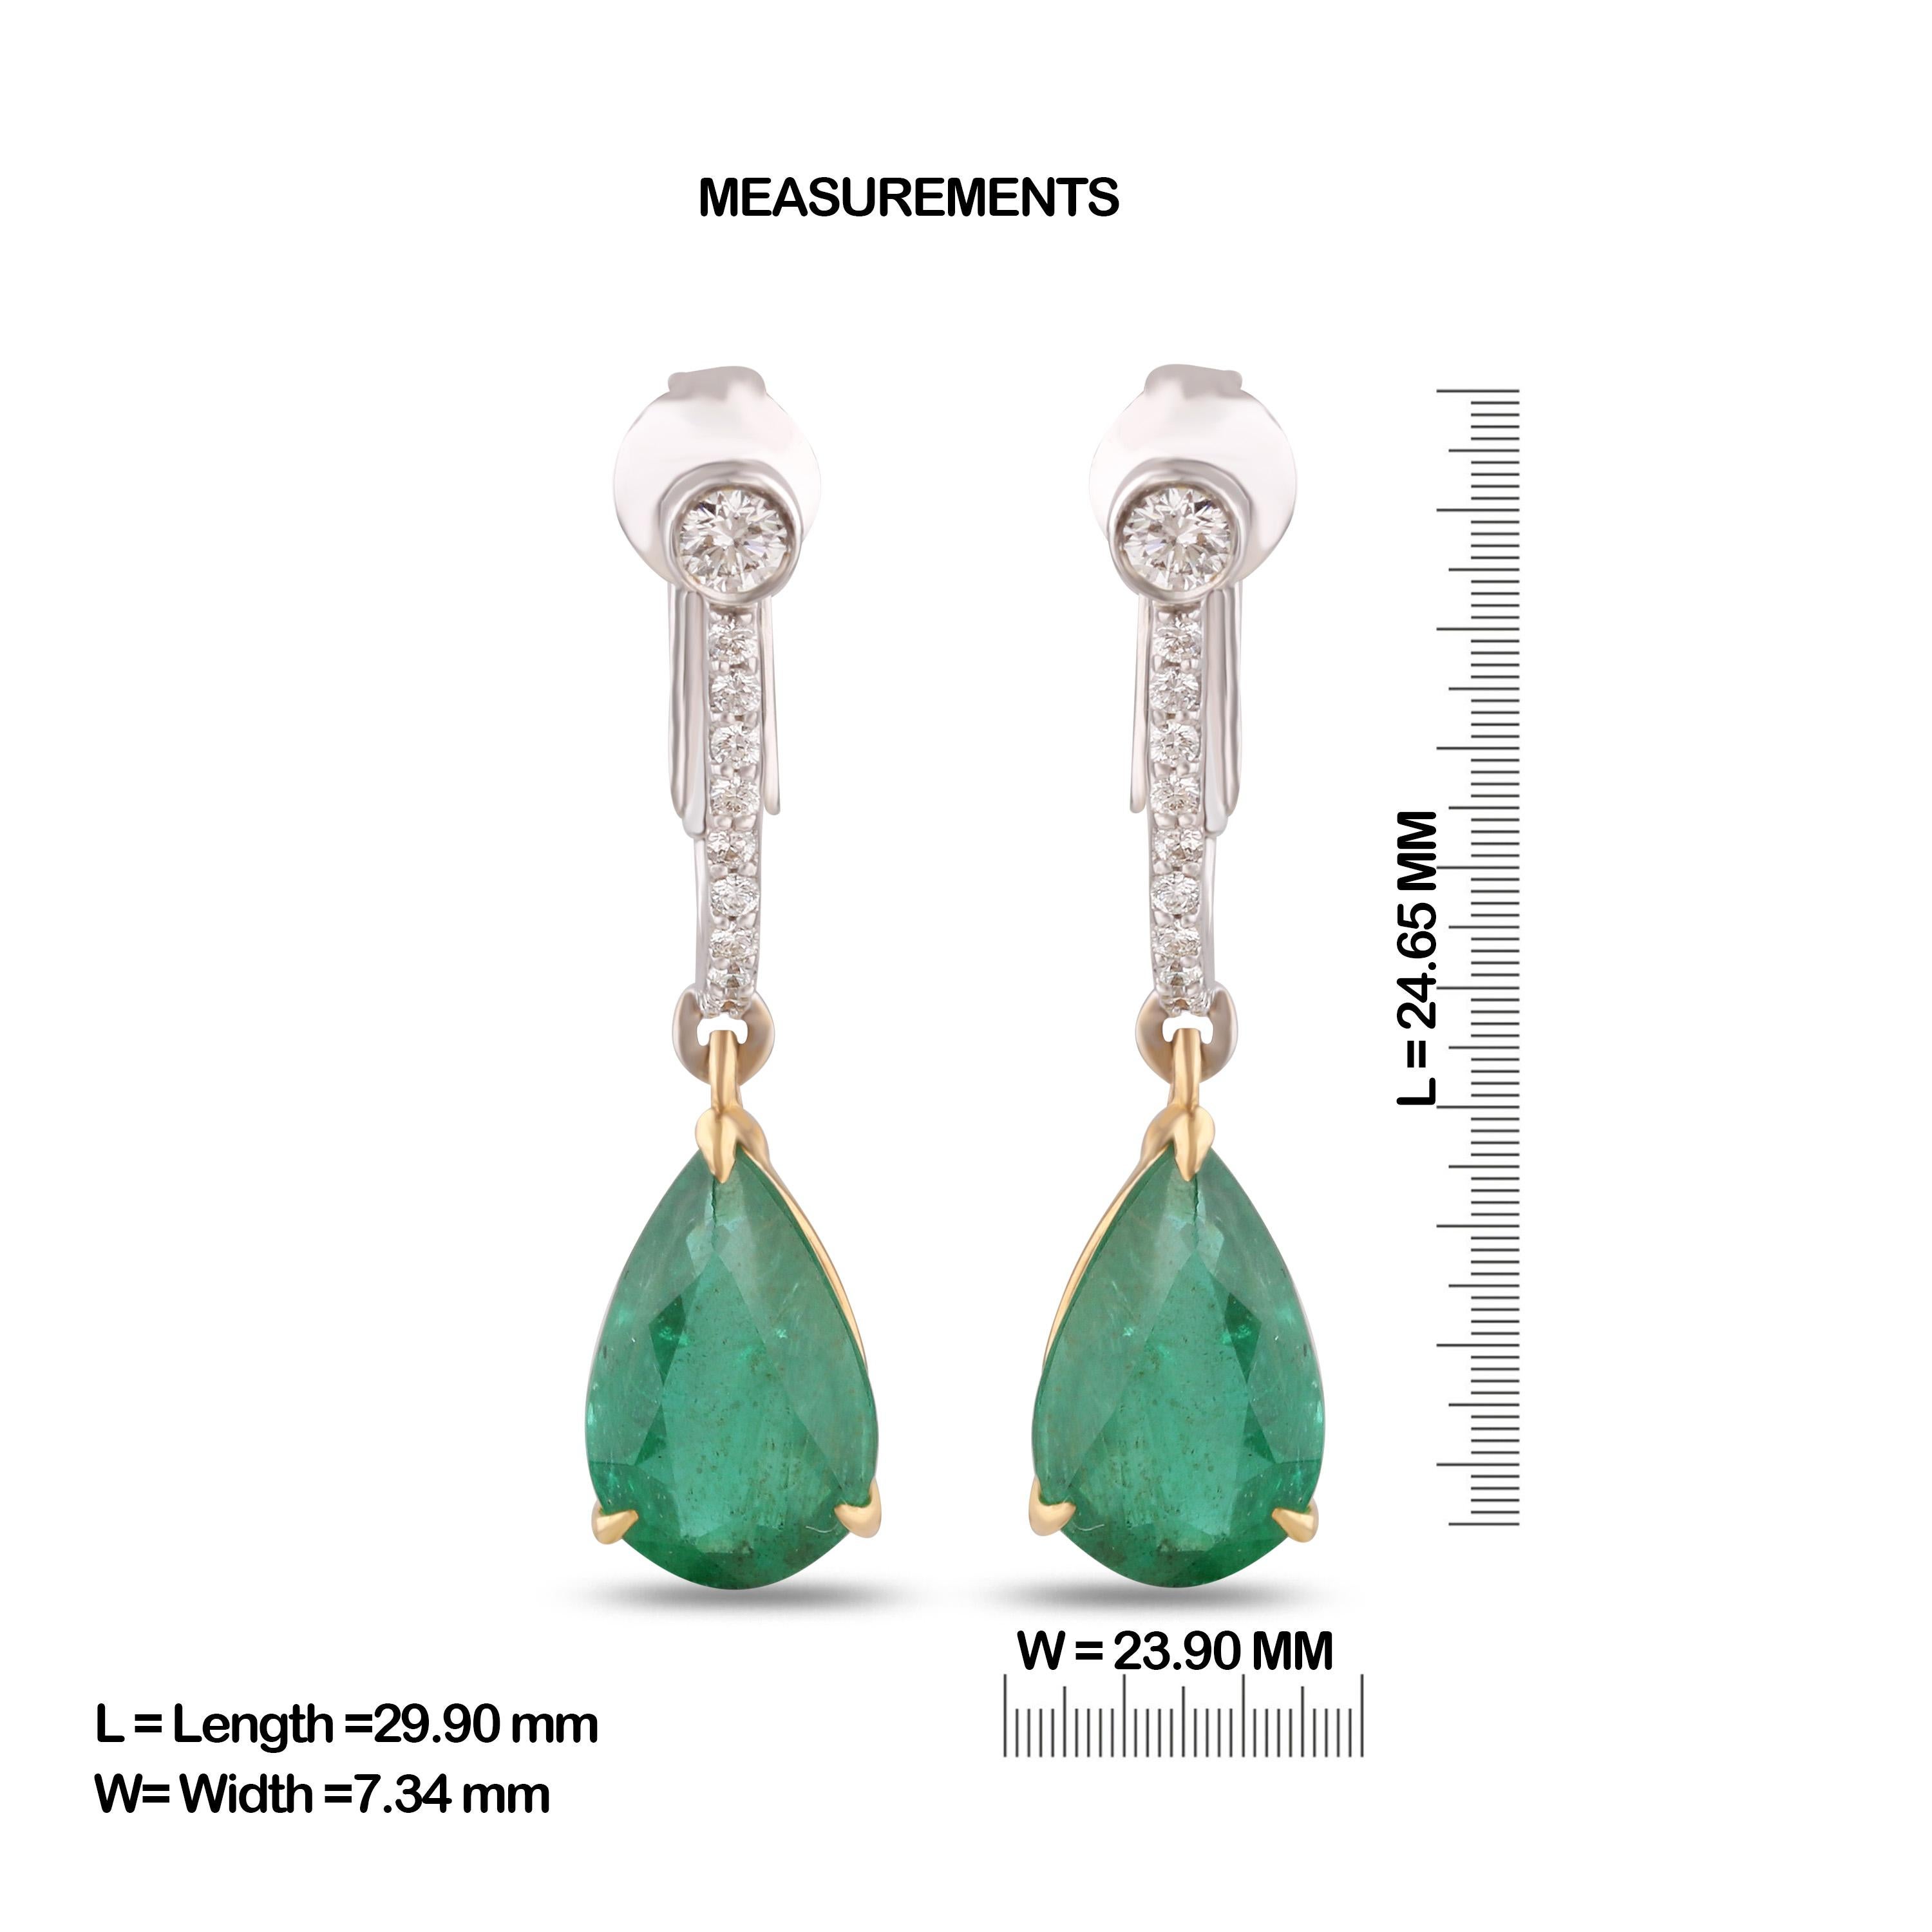 Gross Weight: 5.15  Grams
Diamond Weight: 0.30 cts
Emerald Weight: 4.41 cts
IGI Certification can be done on request.

Video can be uploaded on request.

Gorgeous Greens! Dangling on diamond studded links, these pear shaped emeralds mirror the